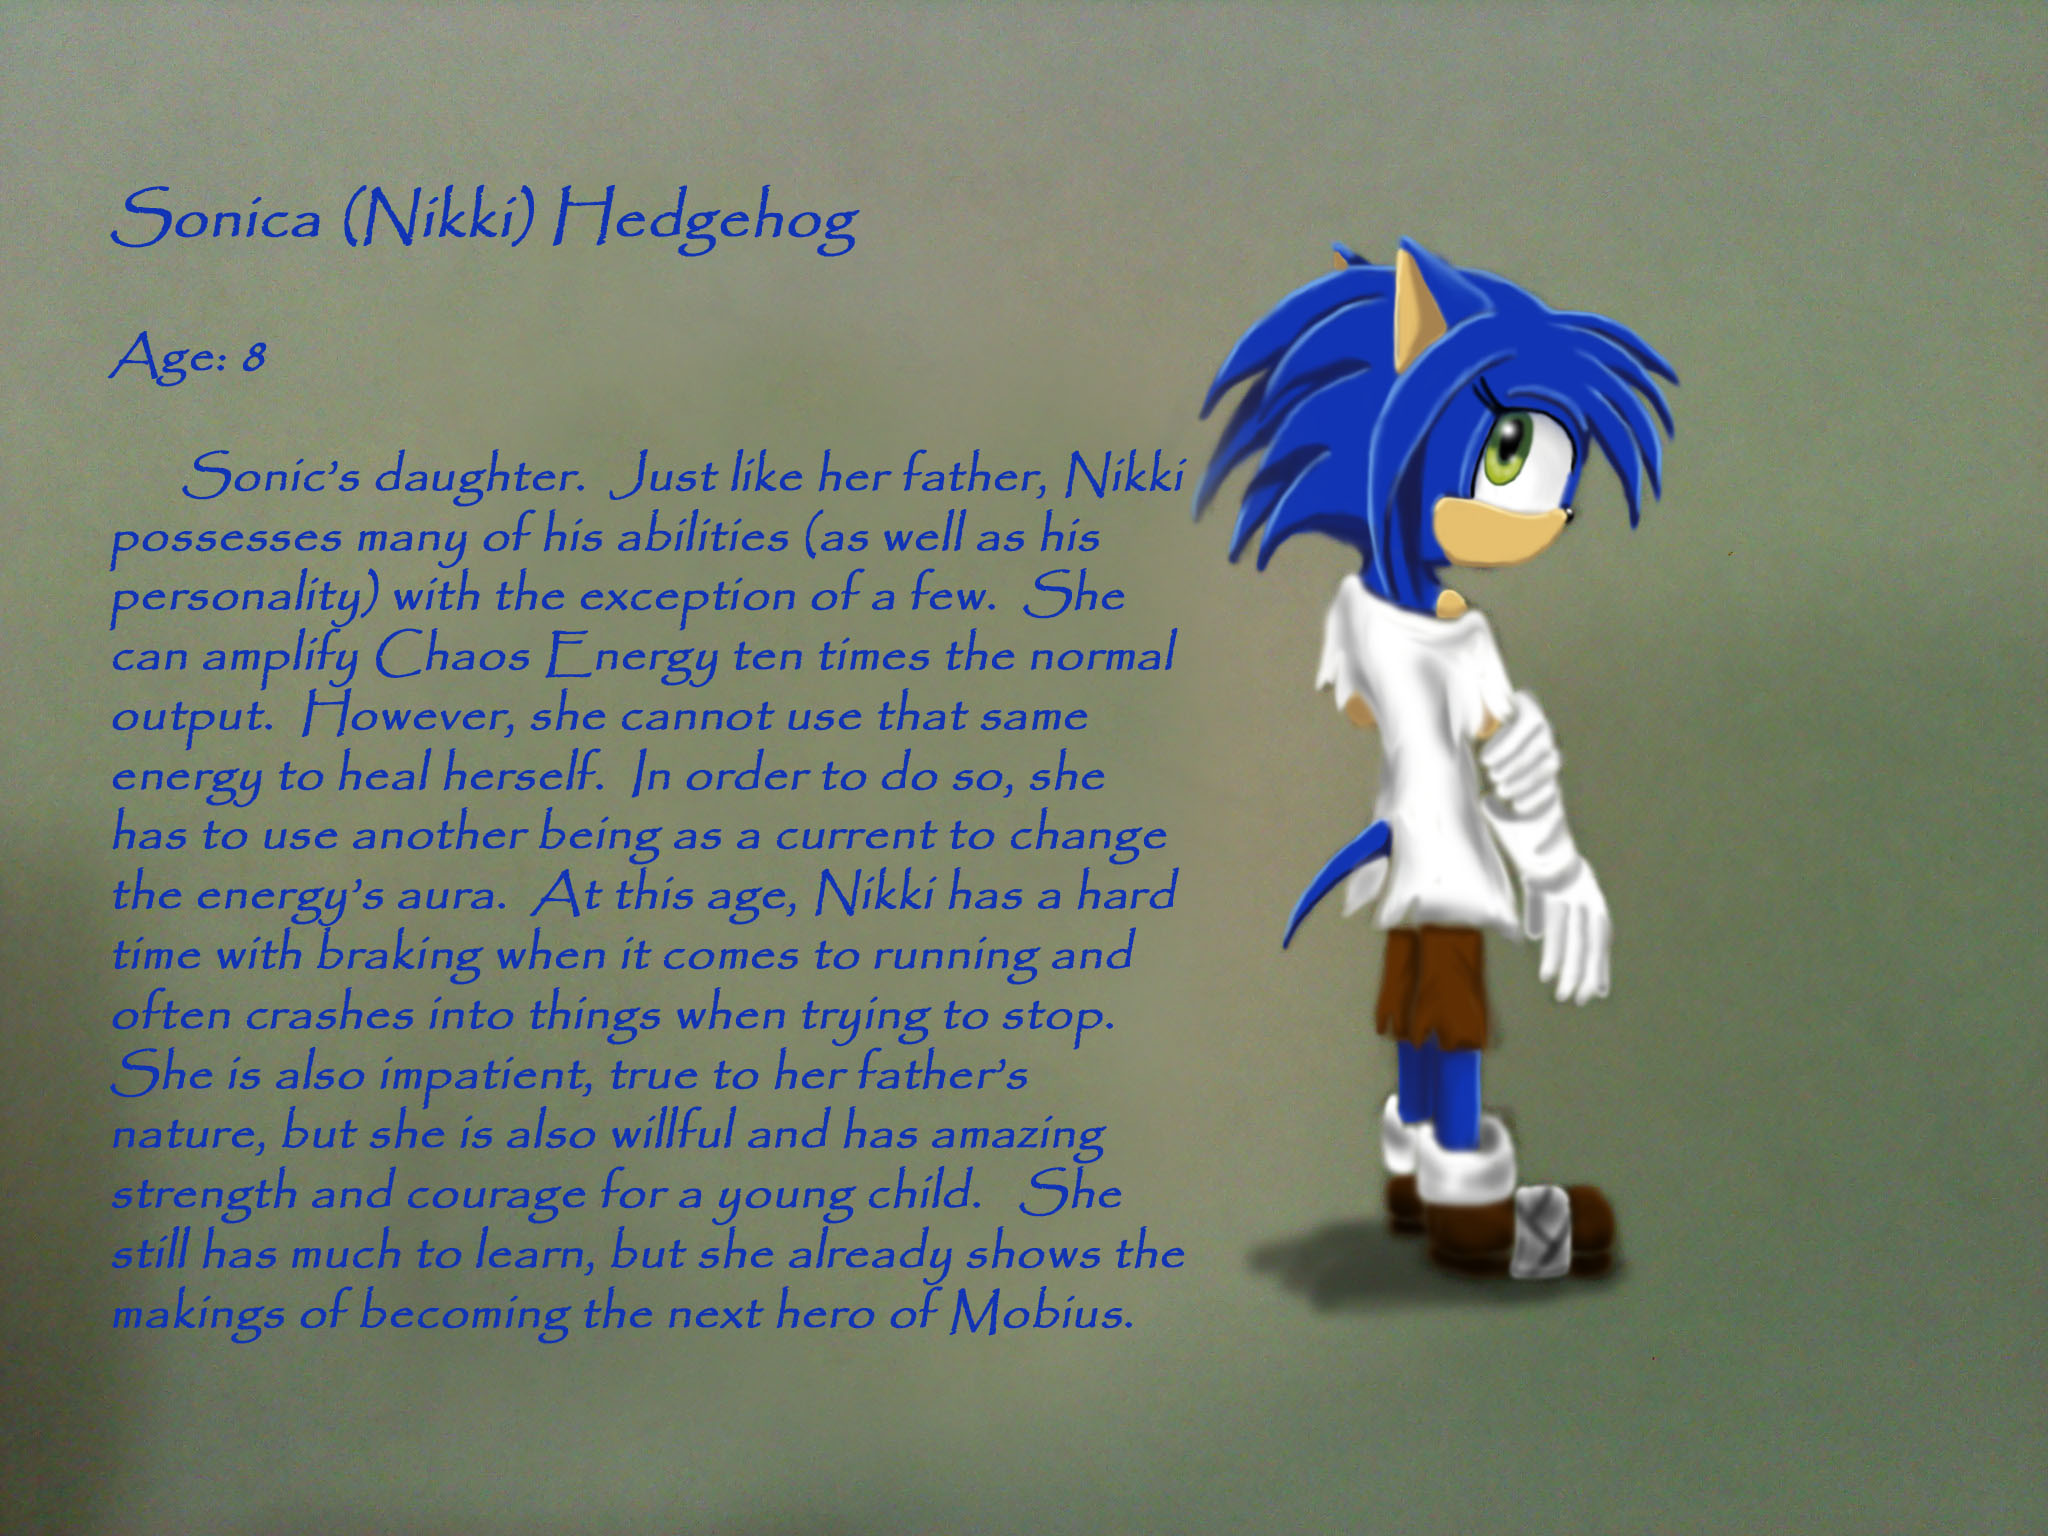 Sonic's Legacy Young Nikki